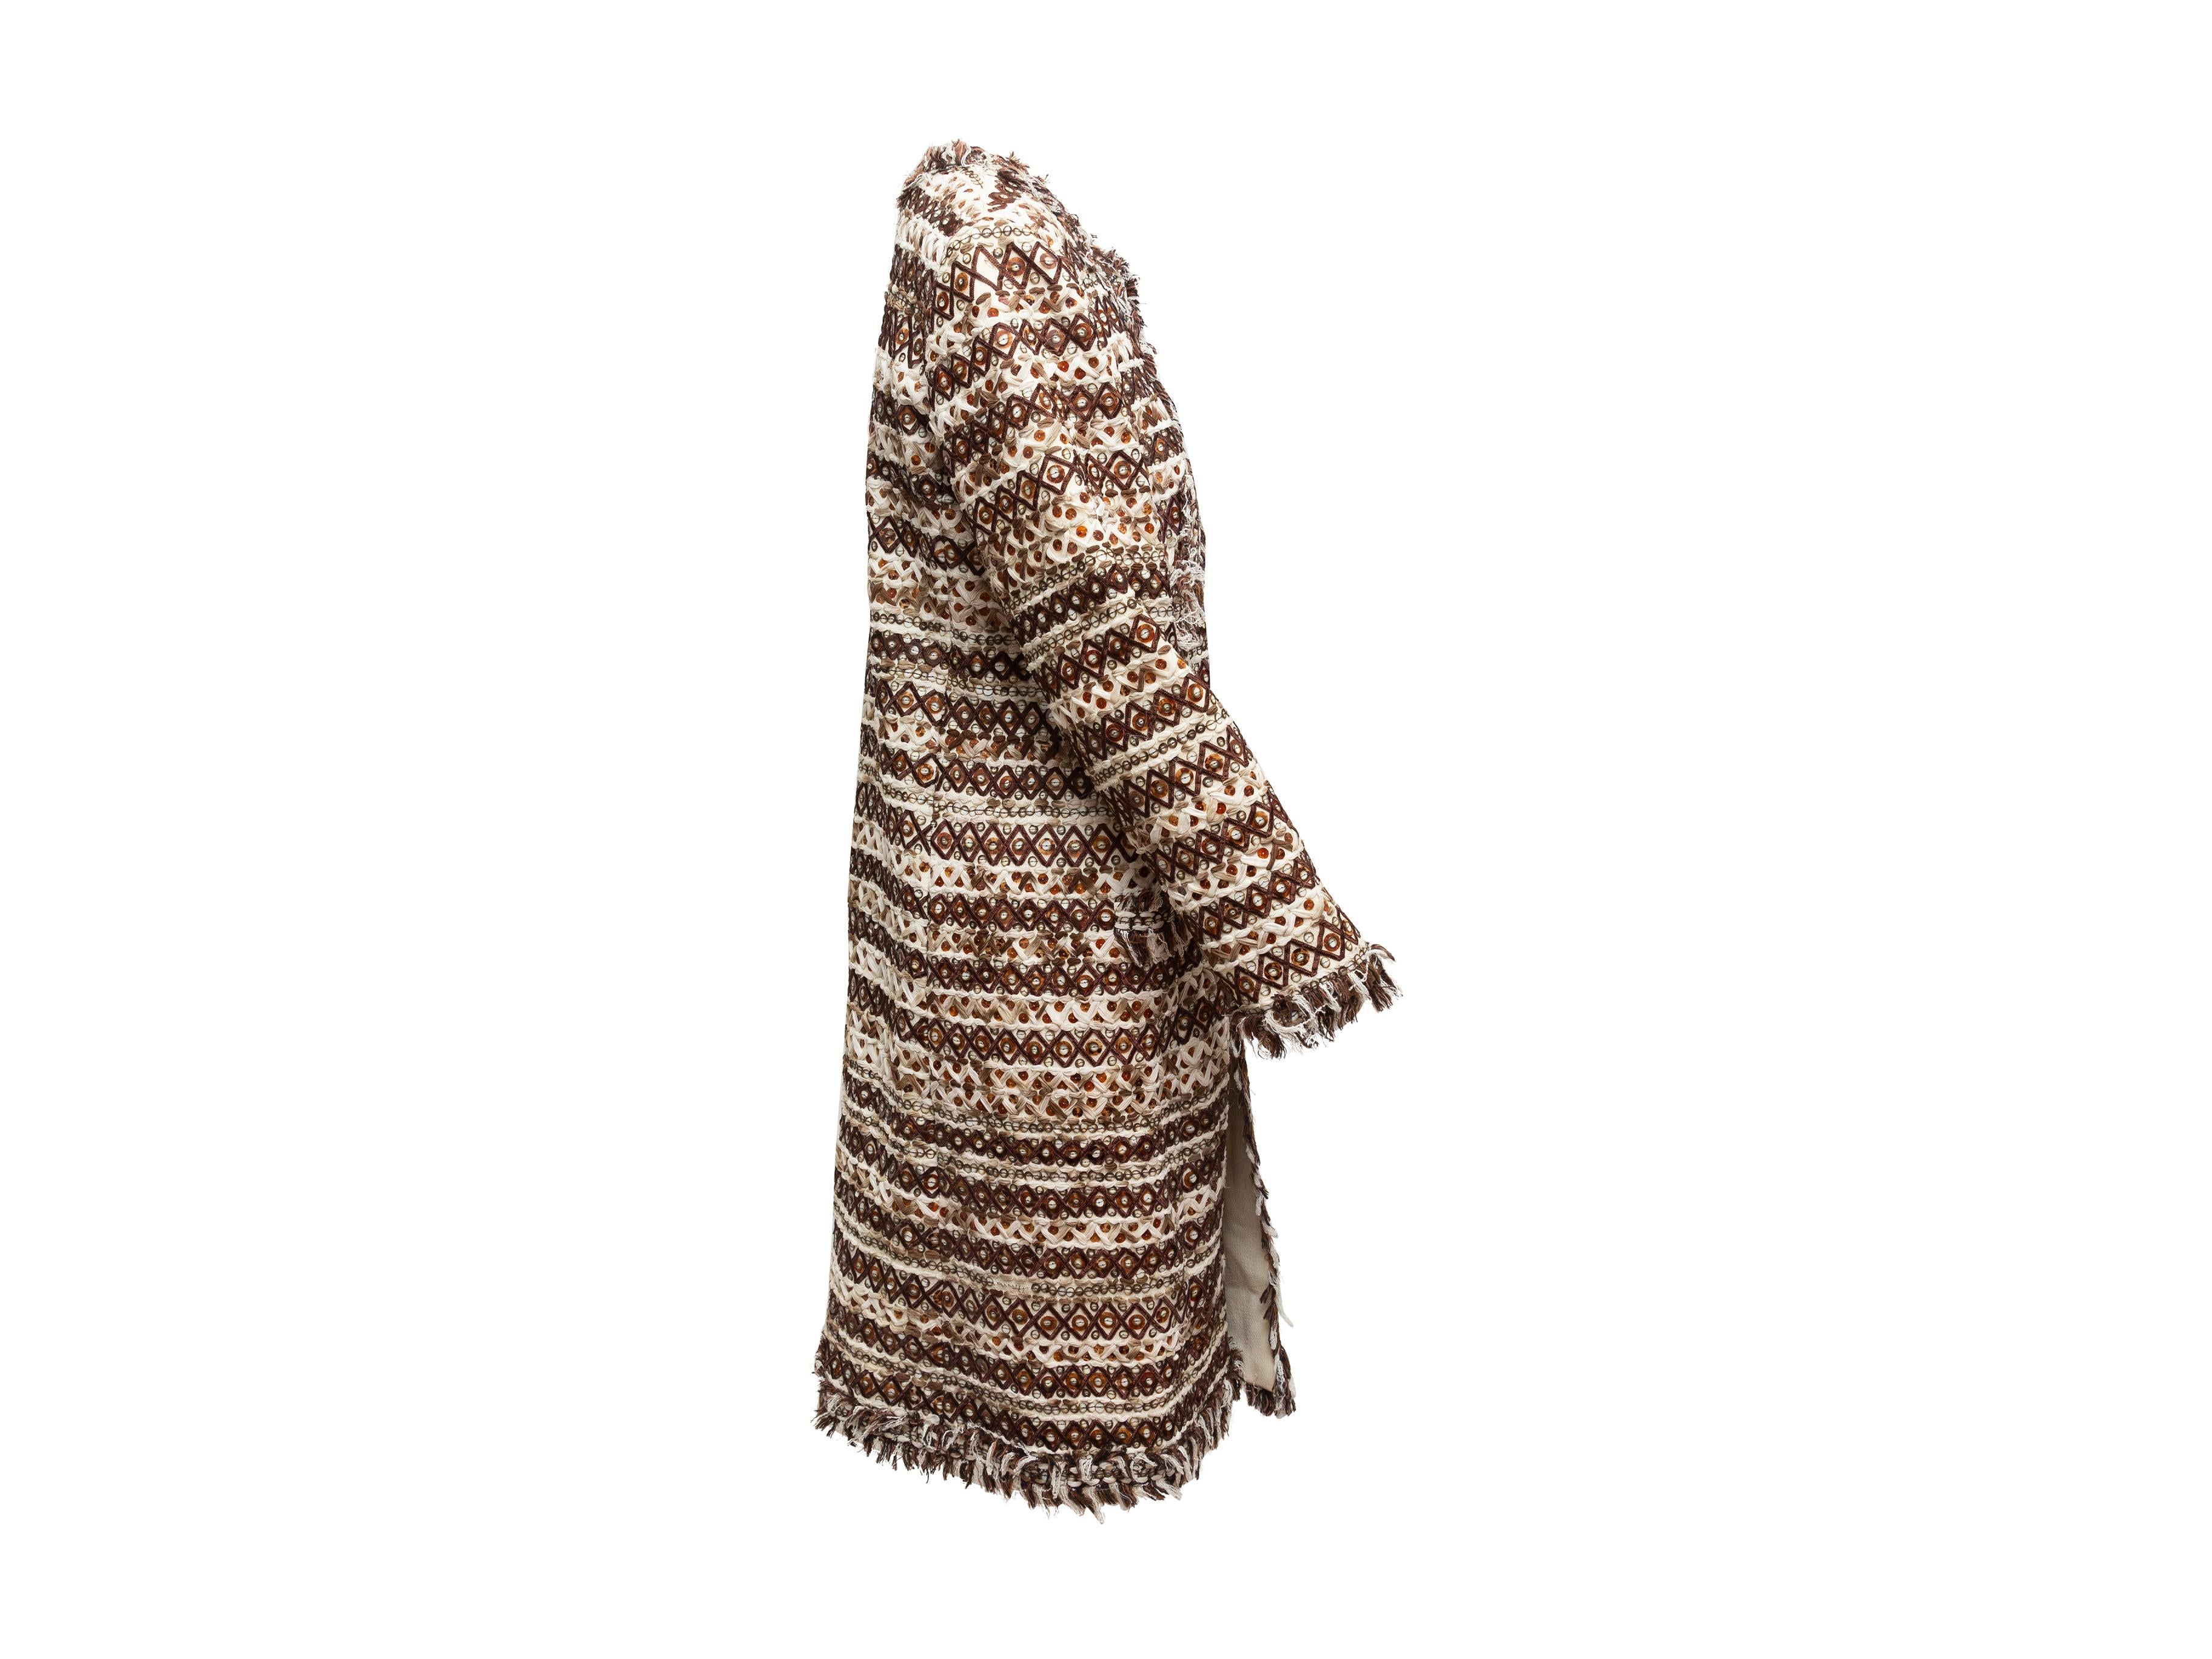 Product details: Brown and cream textured long coat by Oscar de la Renta. Fringe trim and sequin embellishments throughout. Four pockets at front. Closure at center front. 40